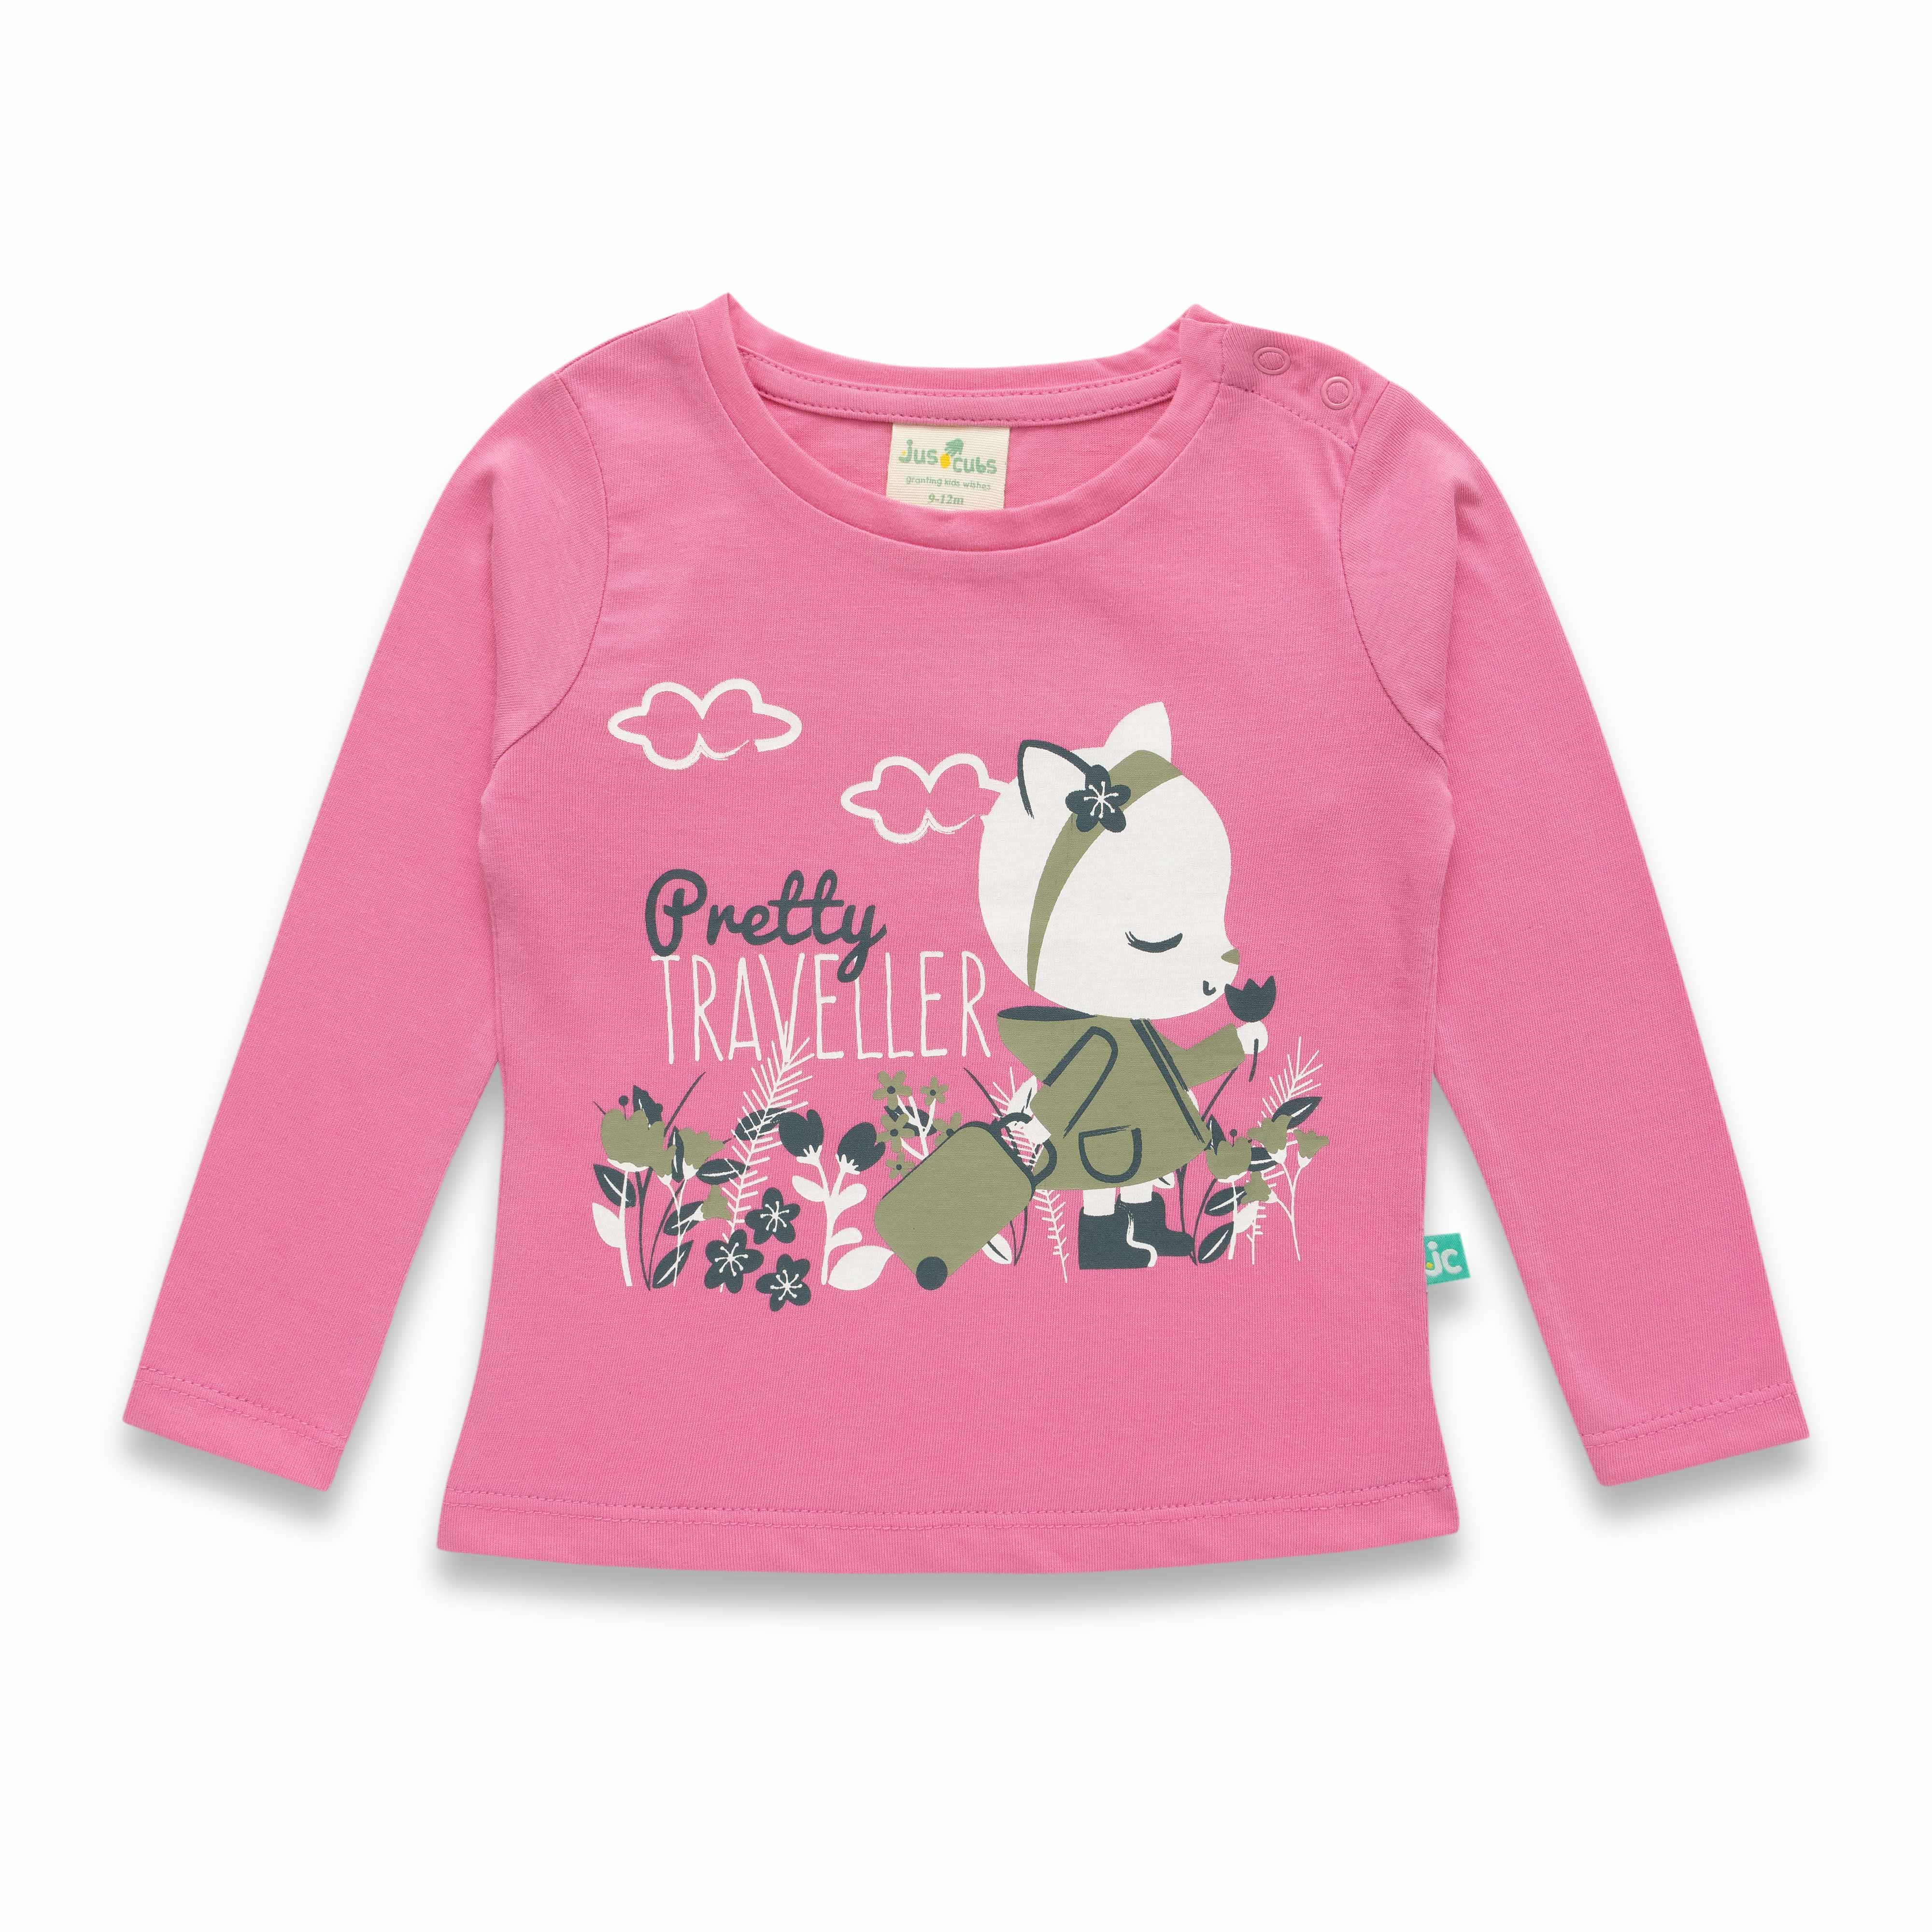 Juscubs Baby Girls Graphic Printed Full Sleeve T Shirt